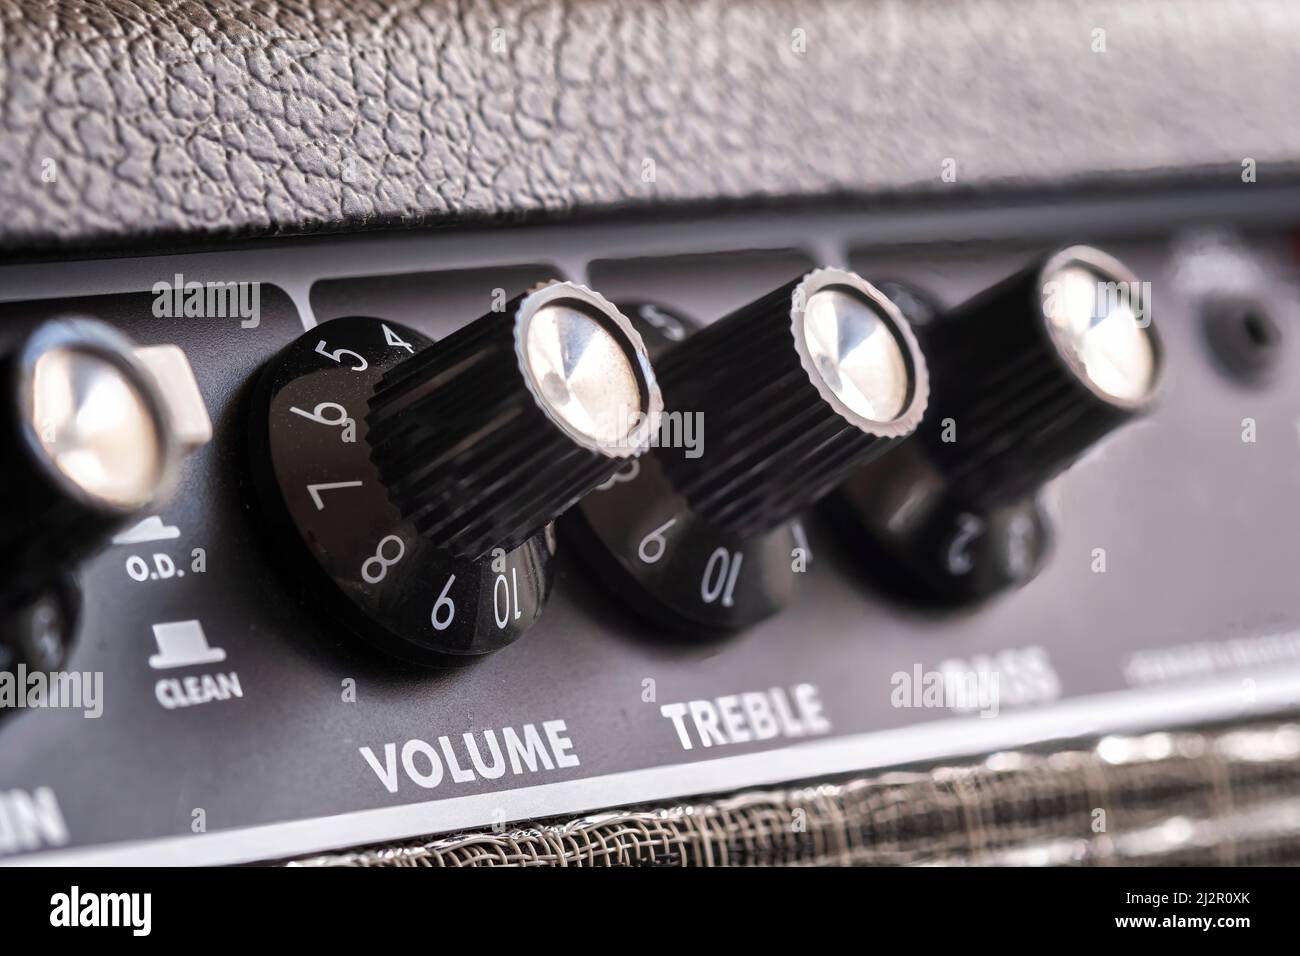 selective focus of the volume, treble and bass control knobs of a guitar amplifier, equalization dials close up, vertical Stock Photo